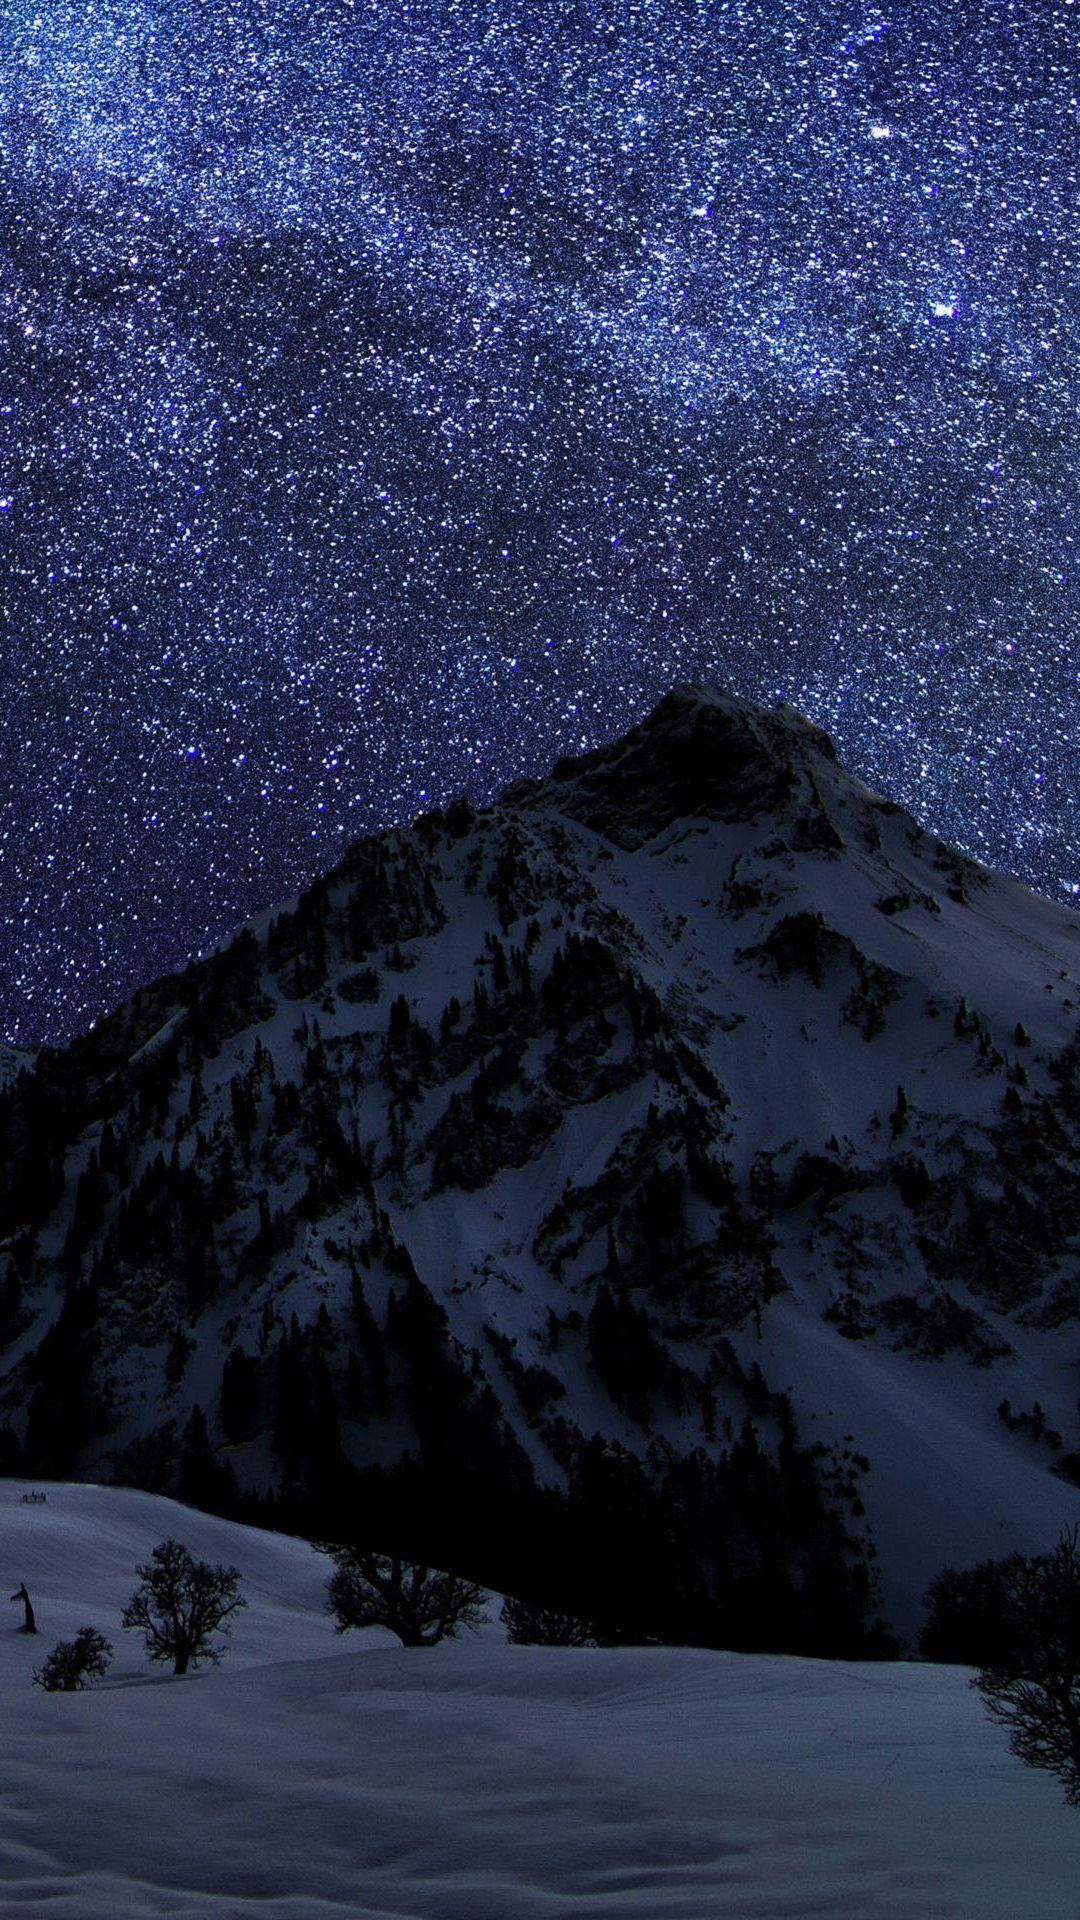 Snow Mountain Night Sky Stars Android Wallpaper free download